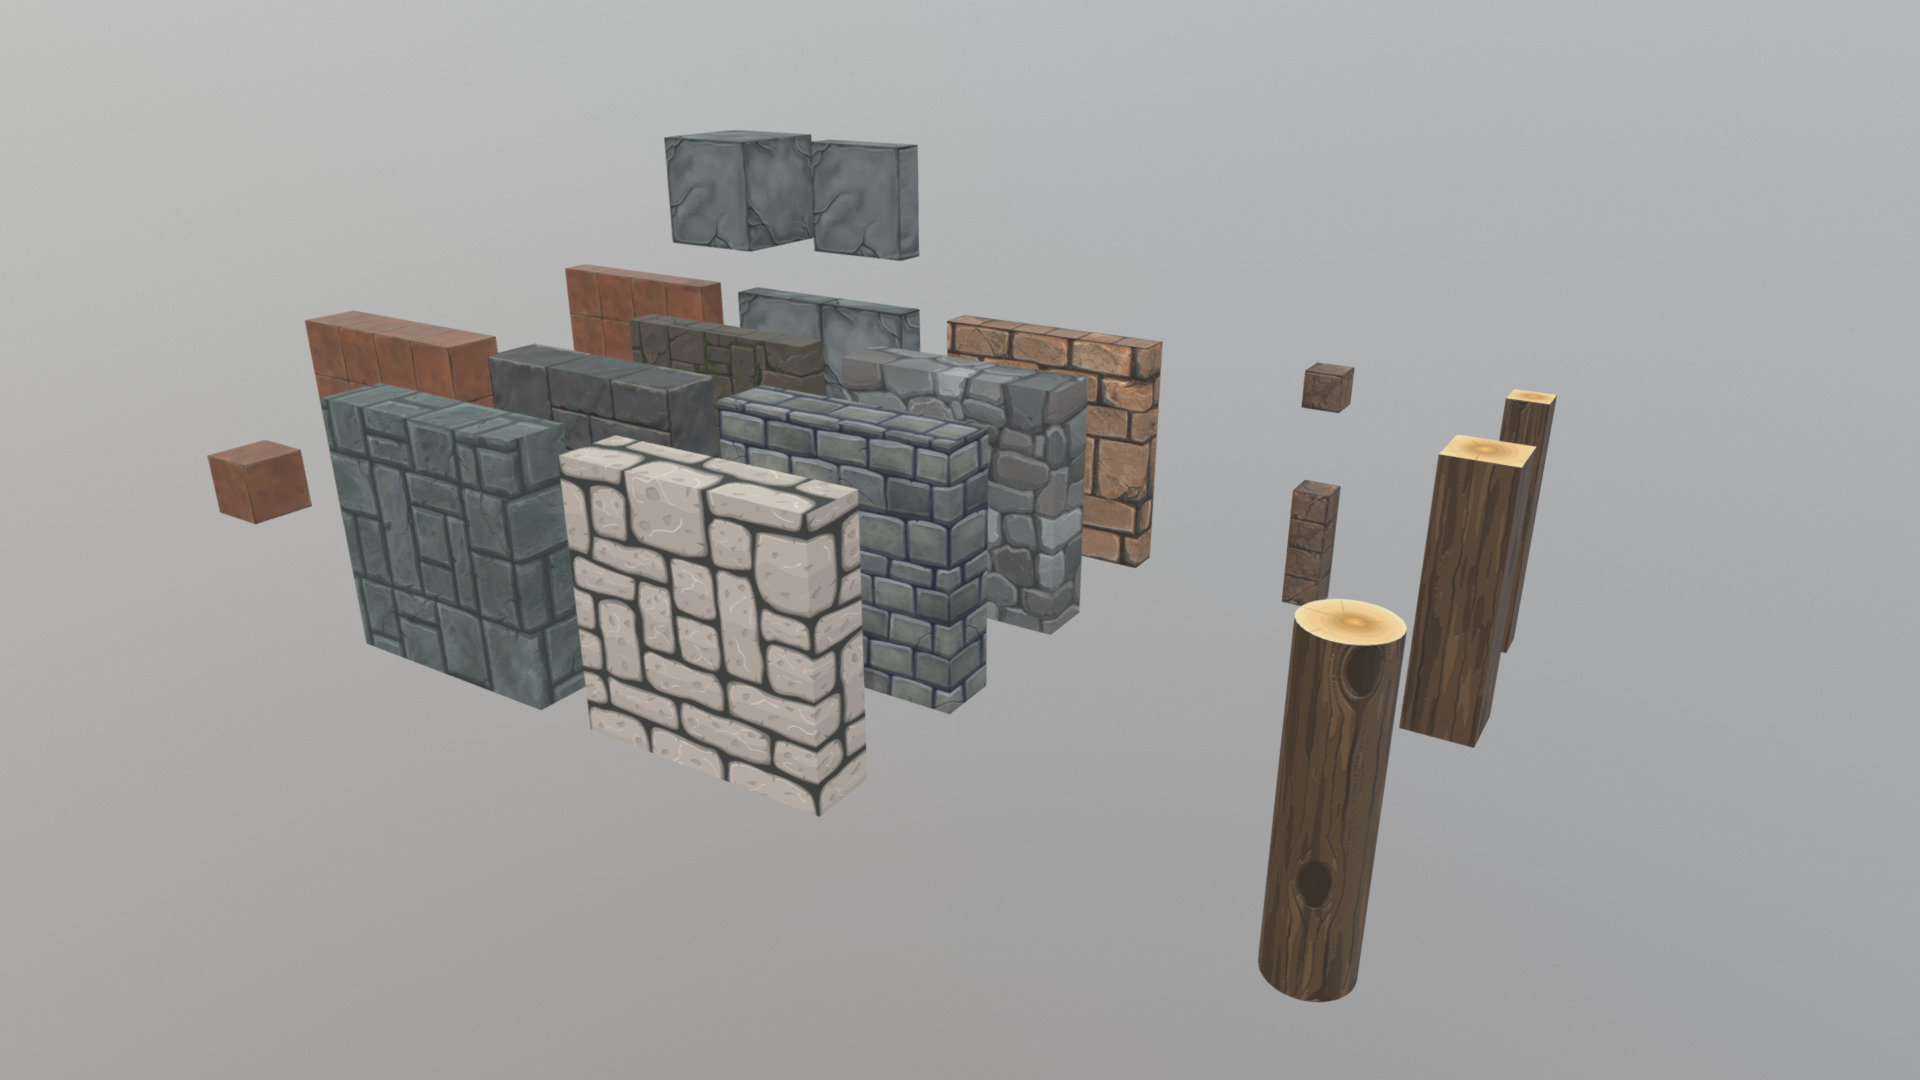 Some basic walls and floors with cartoon textures for building environments in video games - Fantasy Walls and floors - Download Free 3D model by Théo Lerbeil (@supertheo) 3d model